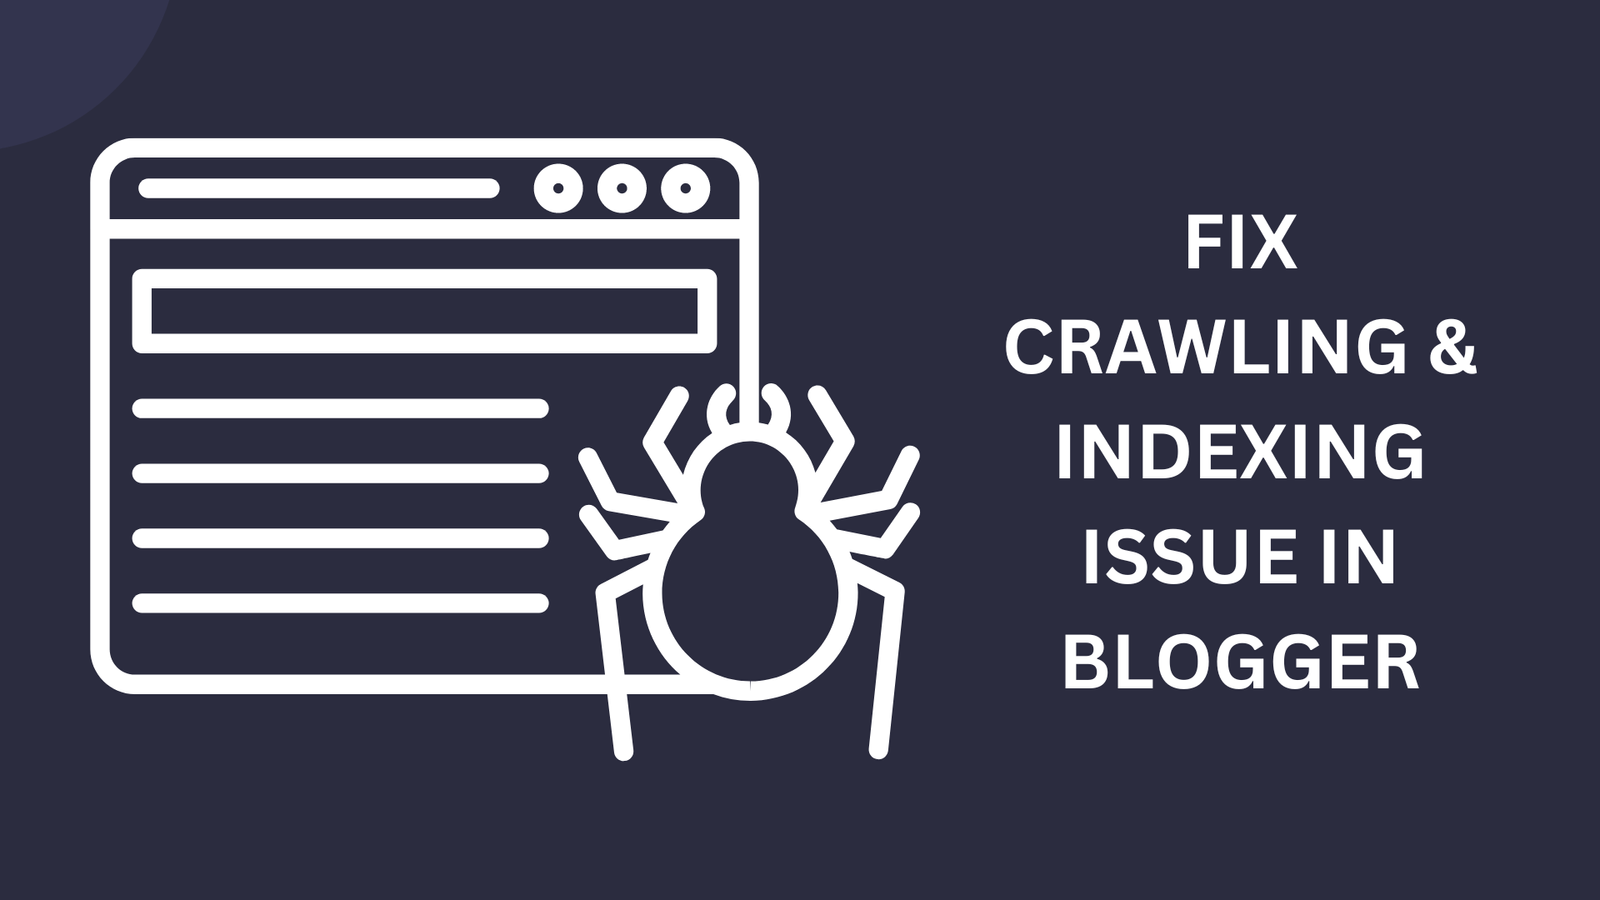 How to Fix crawling & indexing issue